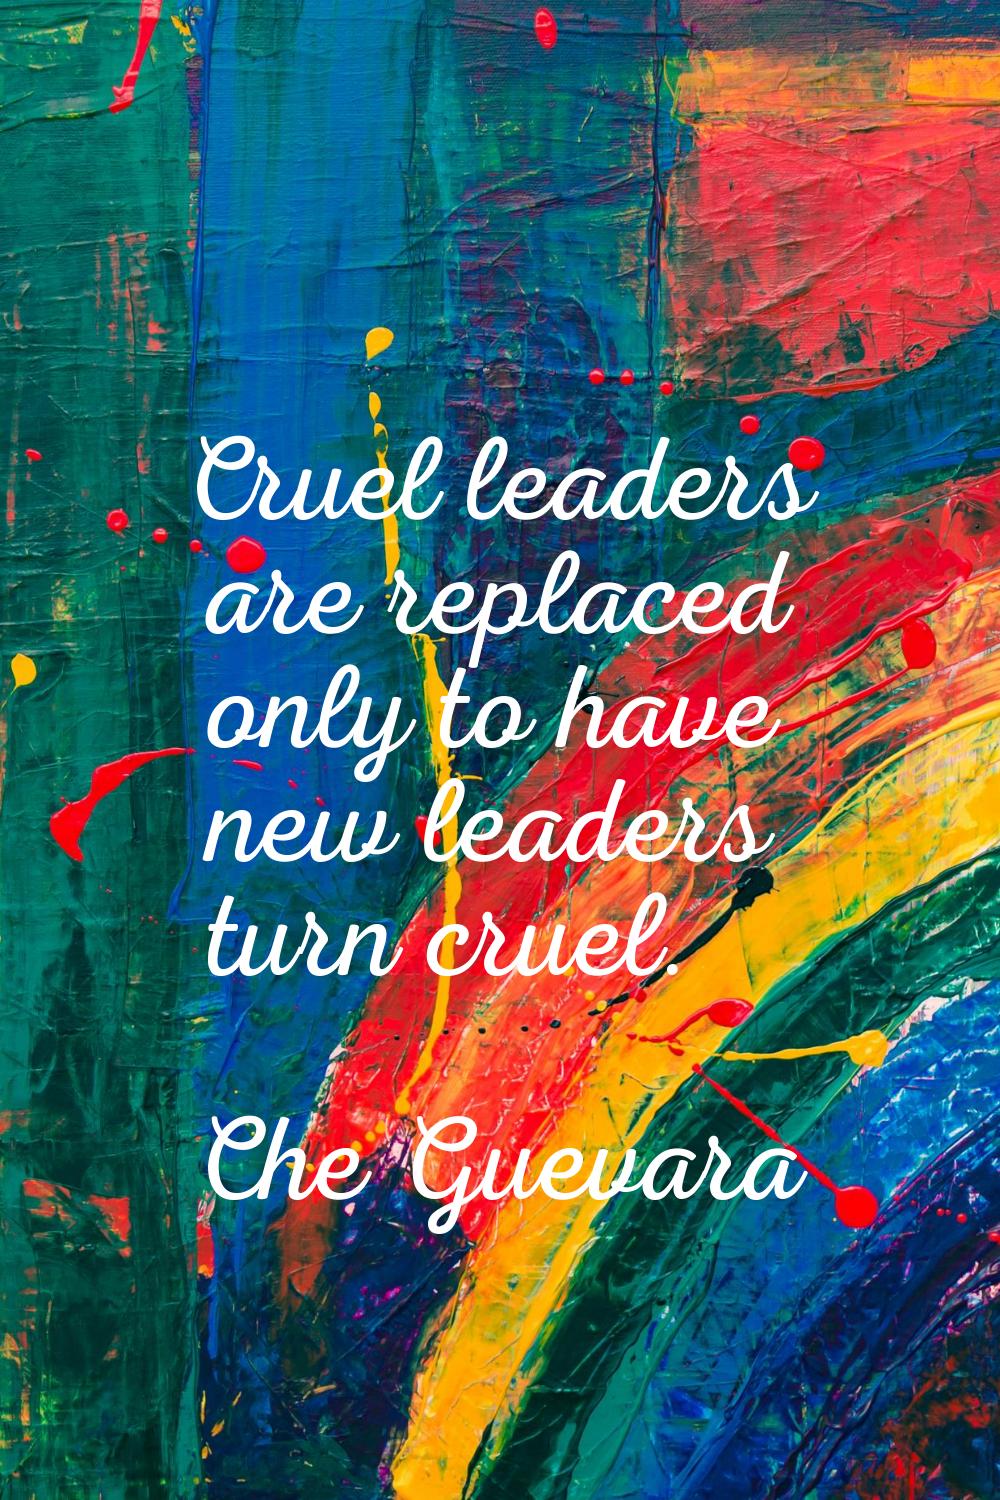 Cruel leaders are replaced only to have new leaders turn cruel.